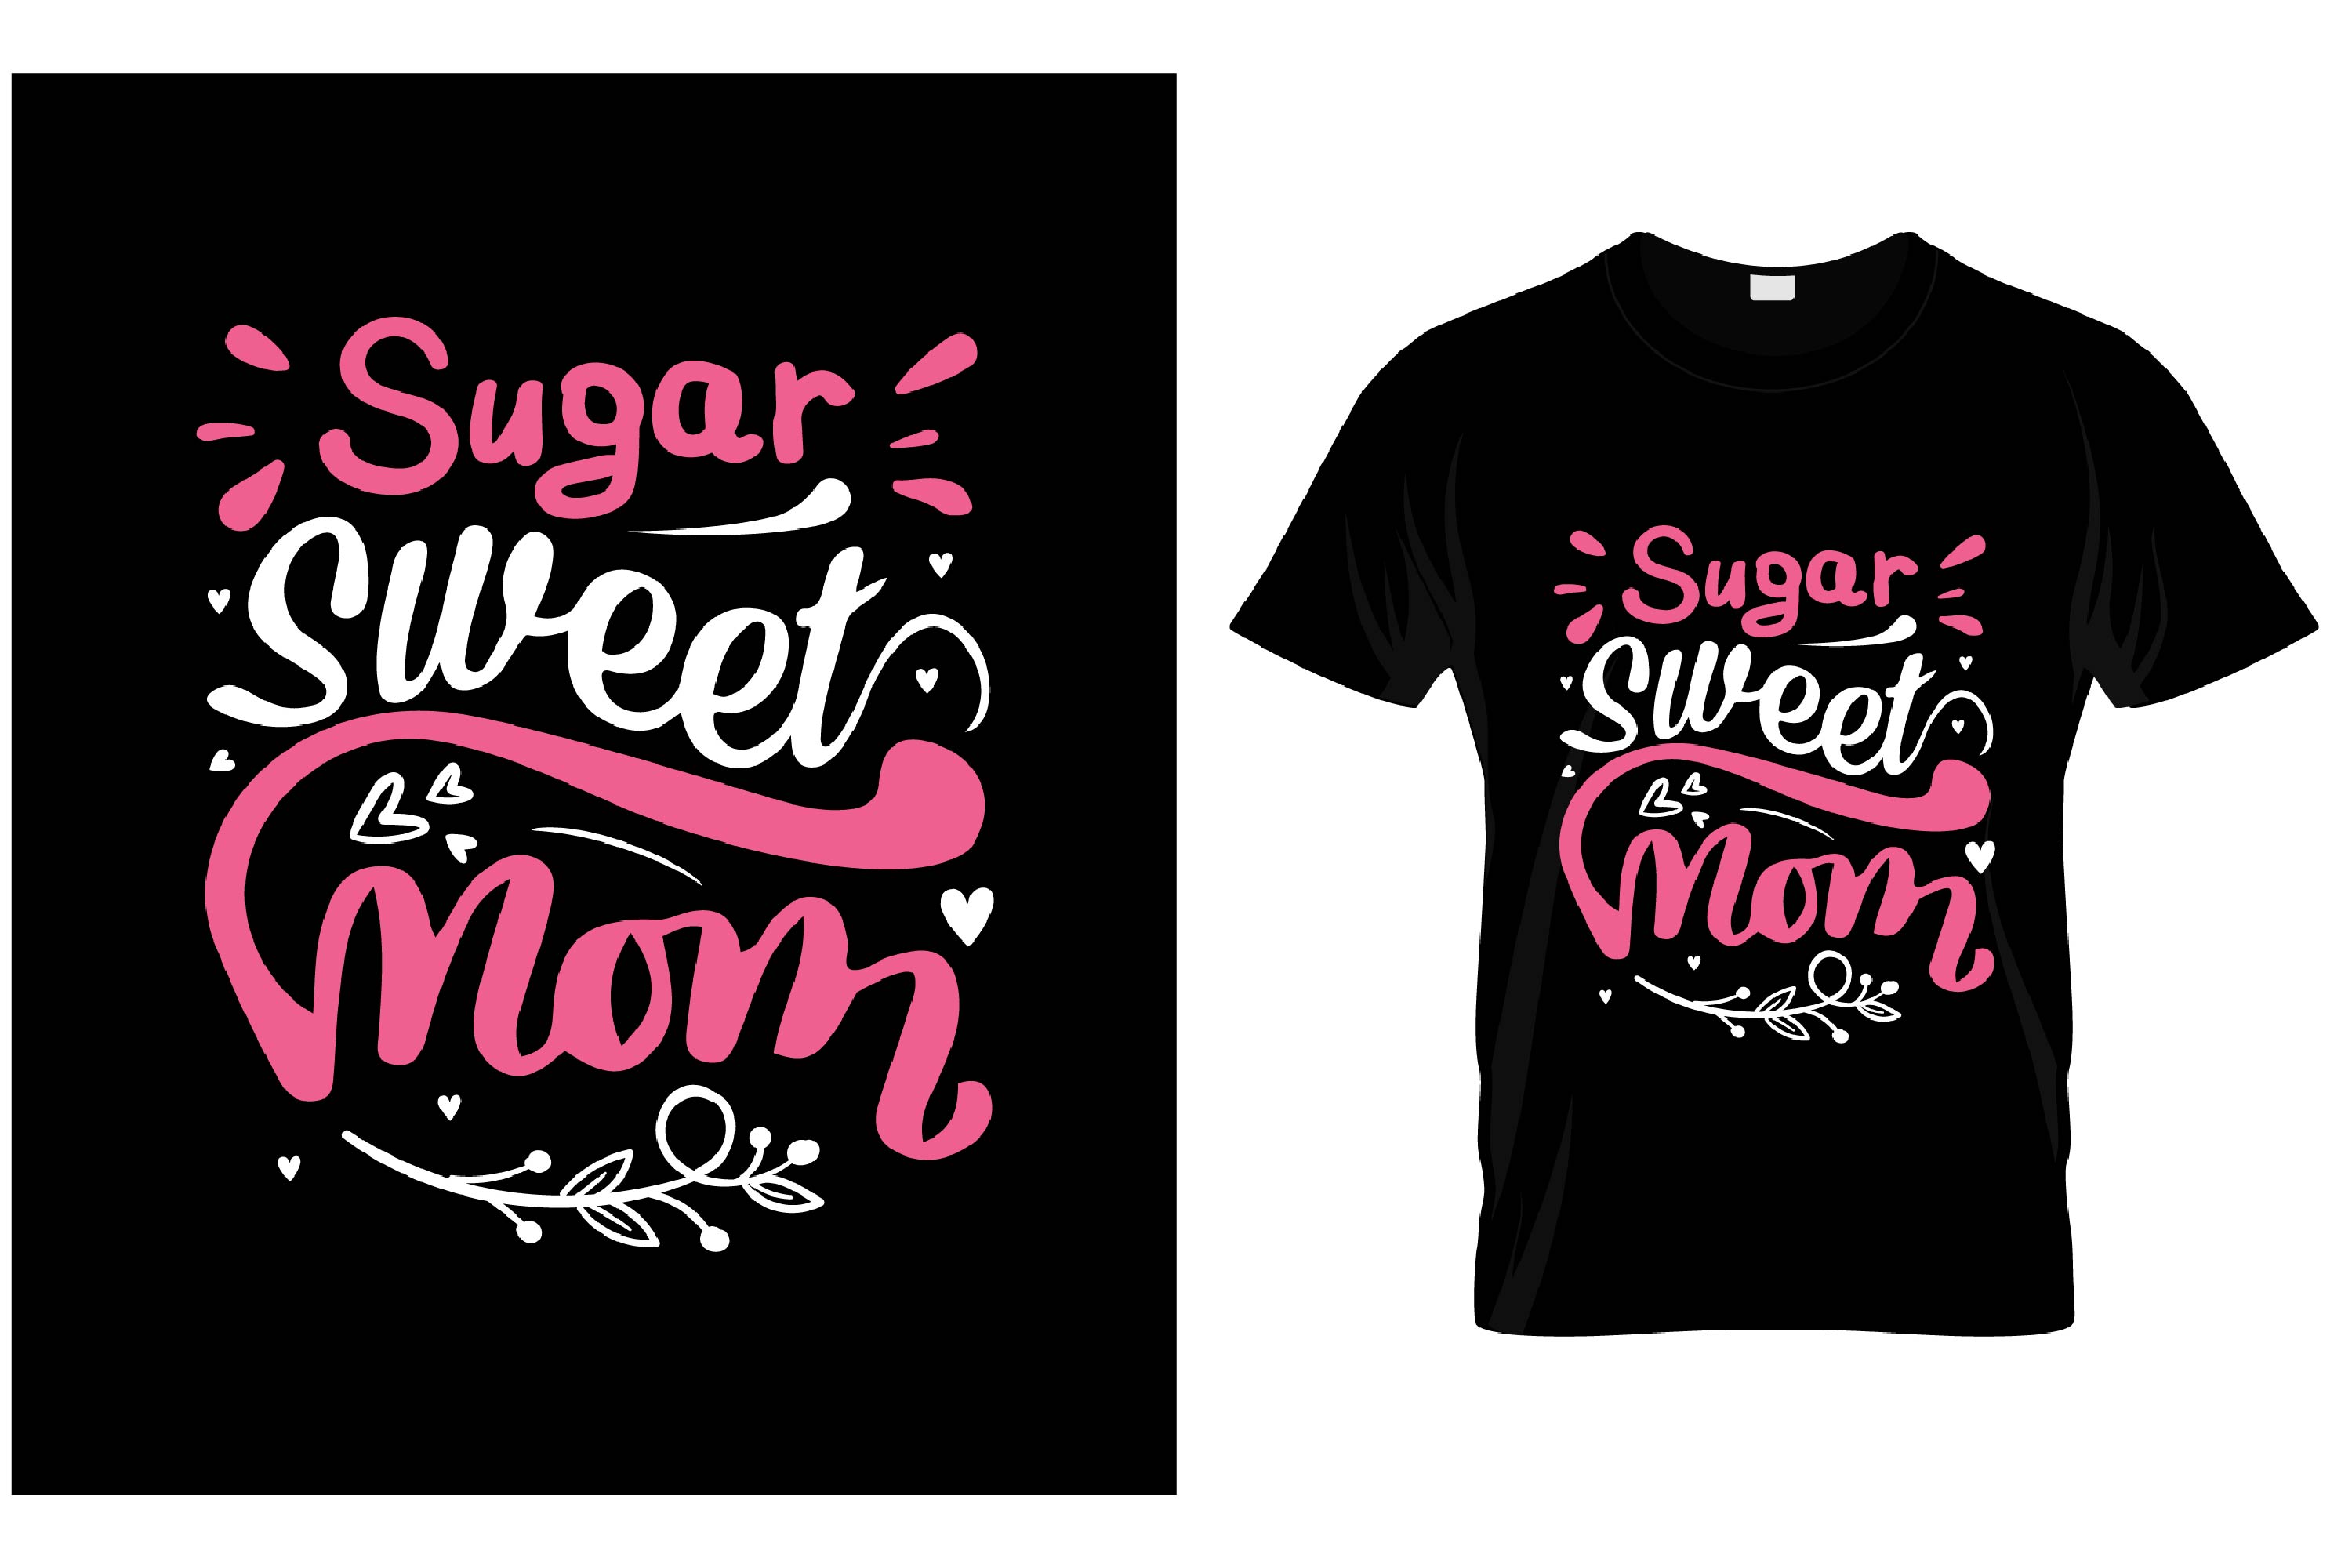 Image of a black t-shirt with a colorful print of pink and white about mom.